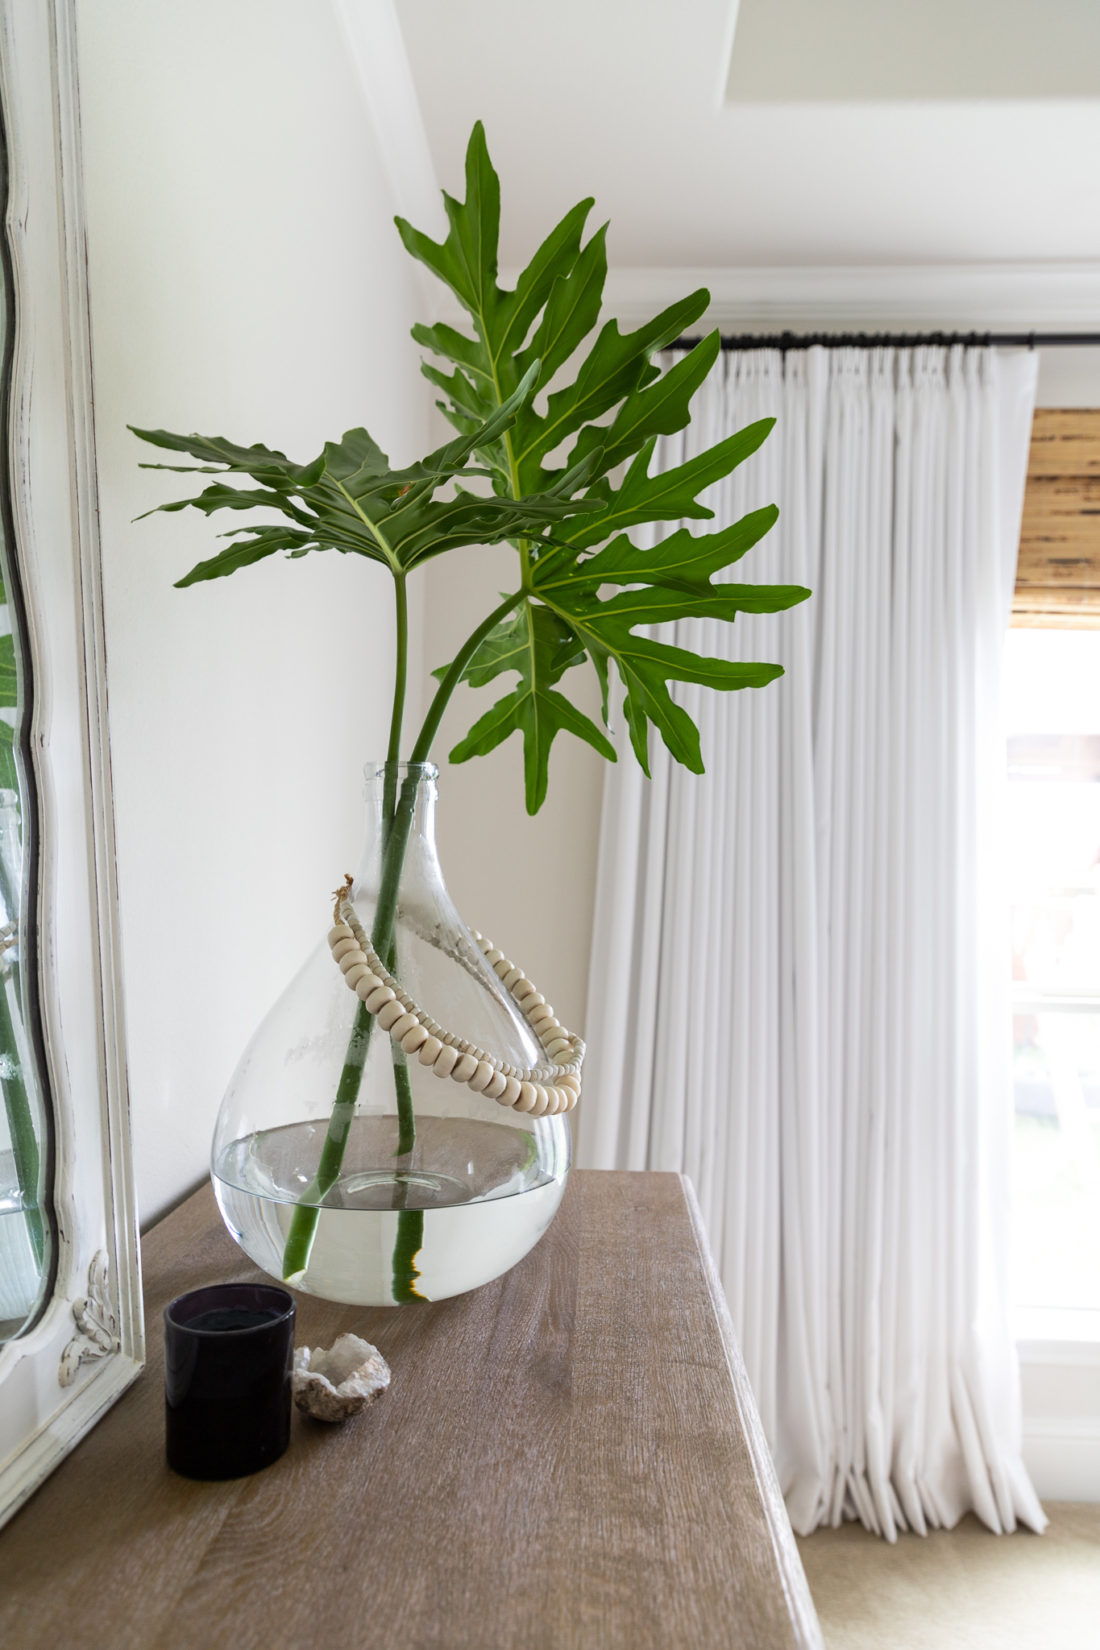 philodendron leaves, dresser styling ideas, white french pleat drapes, summer home tour 2019